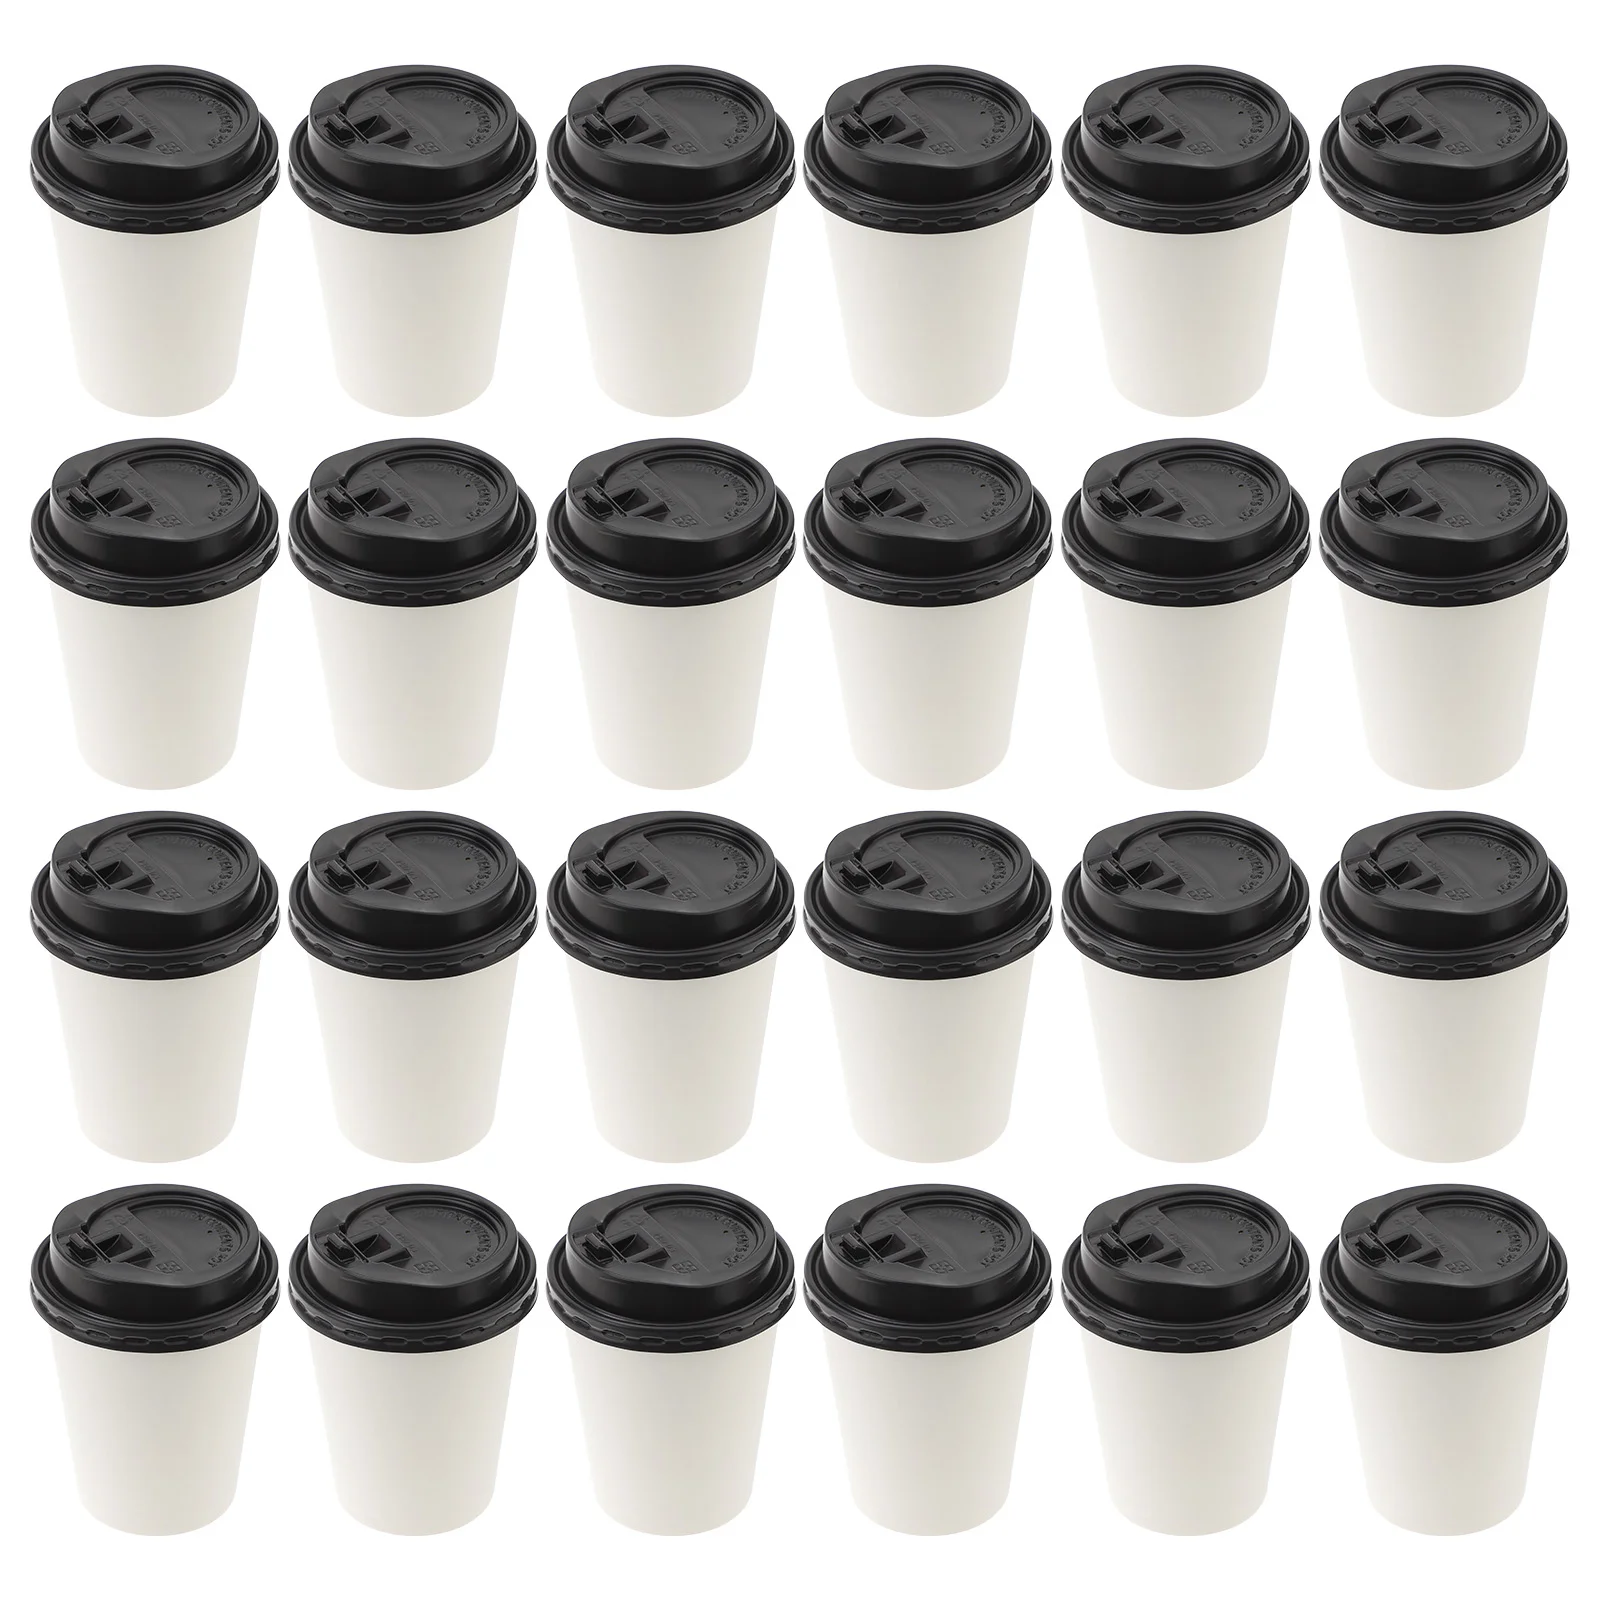 

Coffee Single Paper Cups Pcs 50 Lids Cups Disposable Go Layer Coffee Insulated Cups Takeaway Cups Cups Lids Takeaway Paper